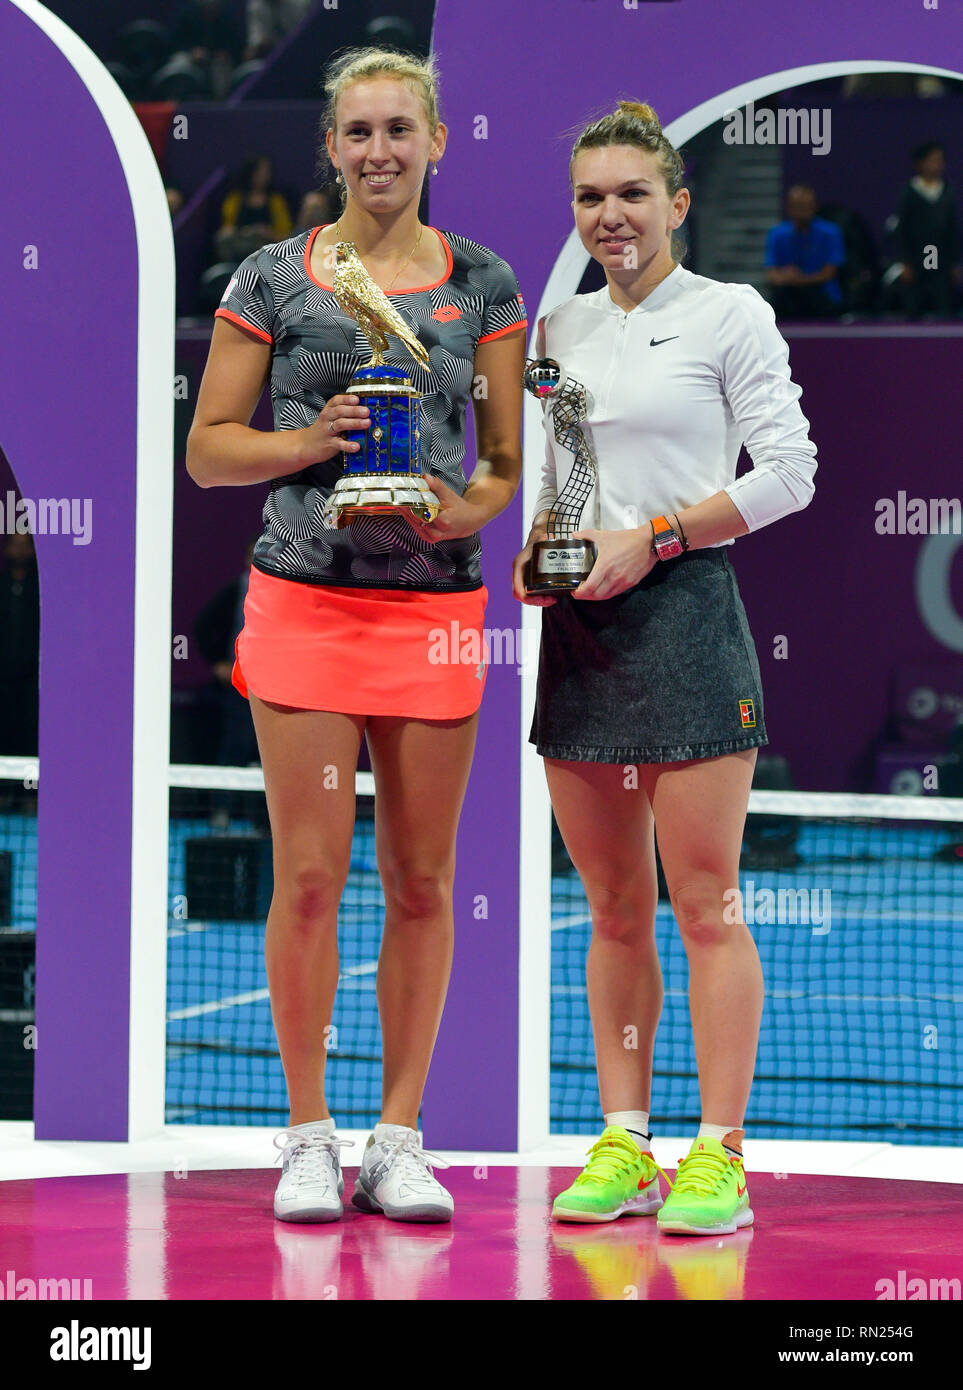 Doha, Qatar. 16th Feb, 2019. Elise Mertens (L) of Belgium and Simona Halep  of Romania pose with their trophies after the single's final match at the  2018 WTA Qatar Open in Doha,